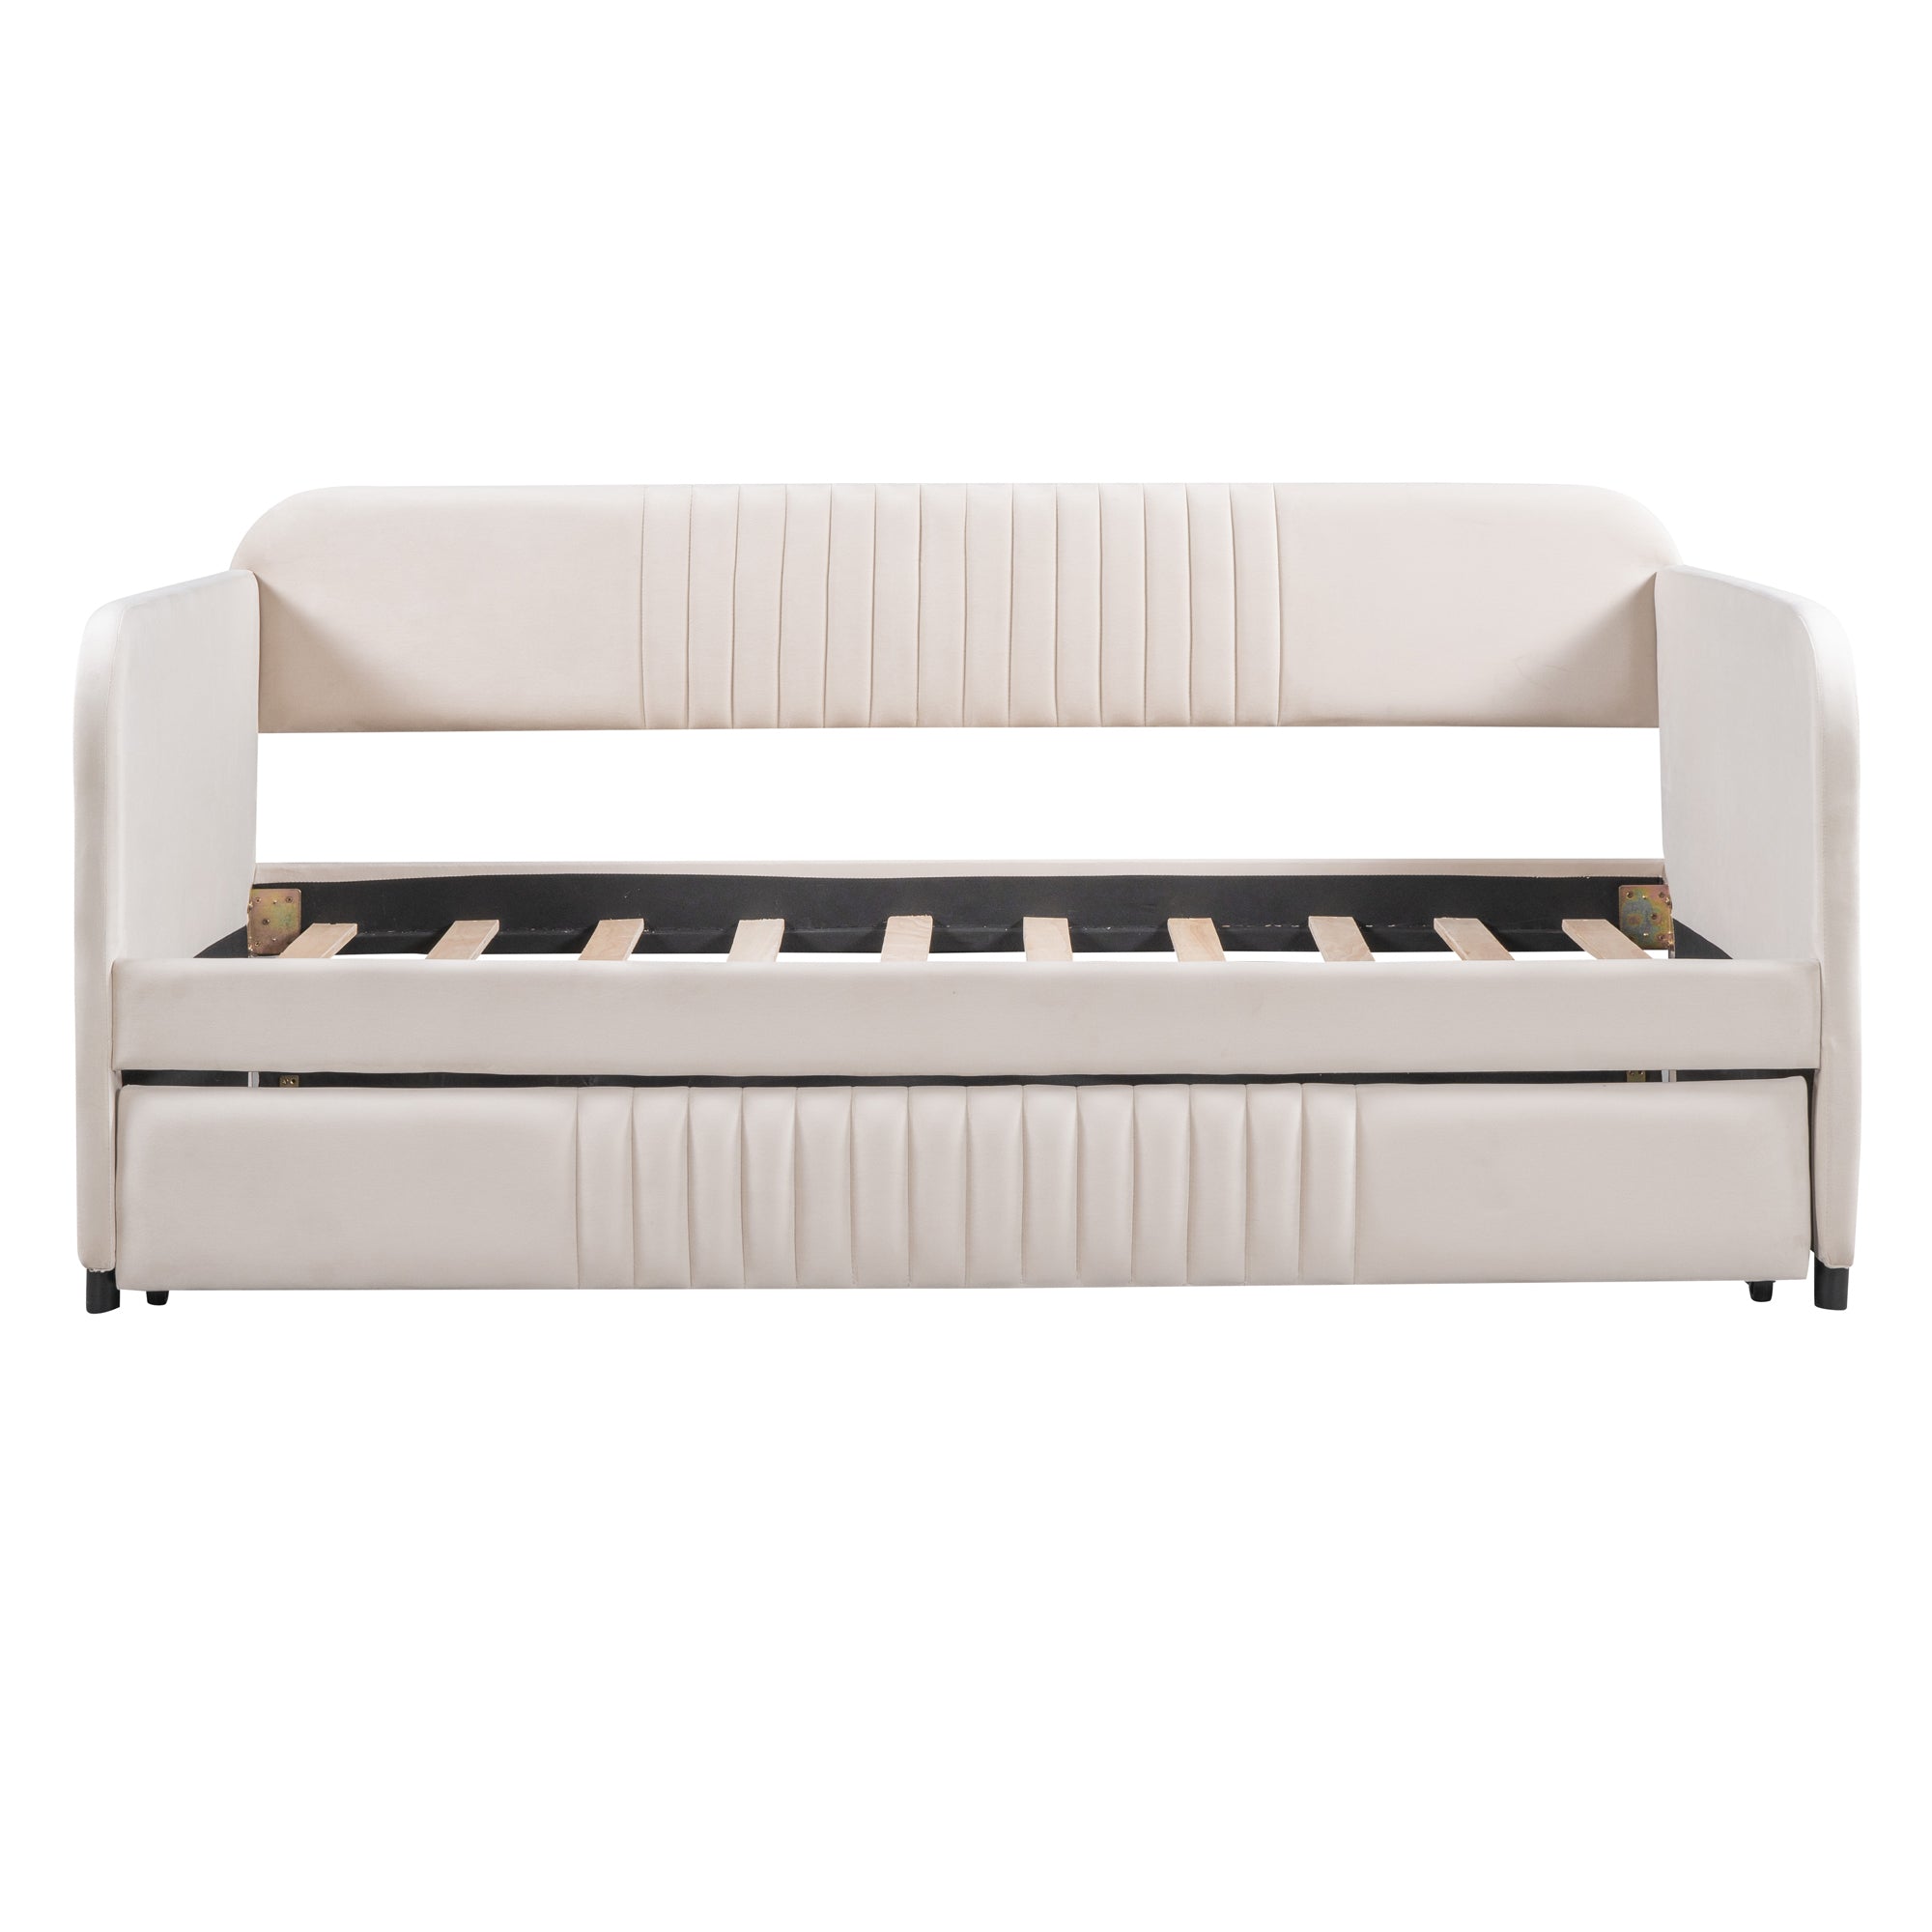 Upholstered Daybed Sofa Bed Twin Size With Trundle Bed and Wood Slat - Beige